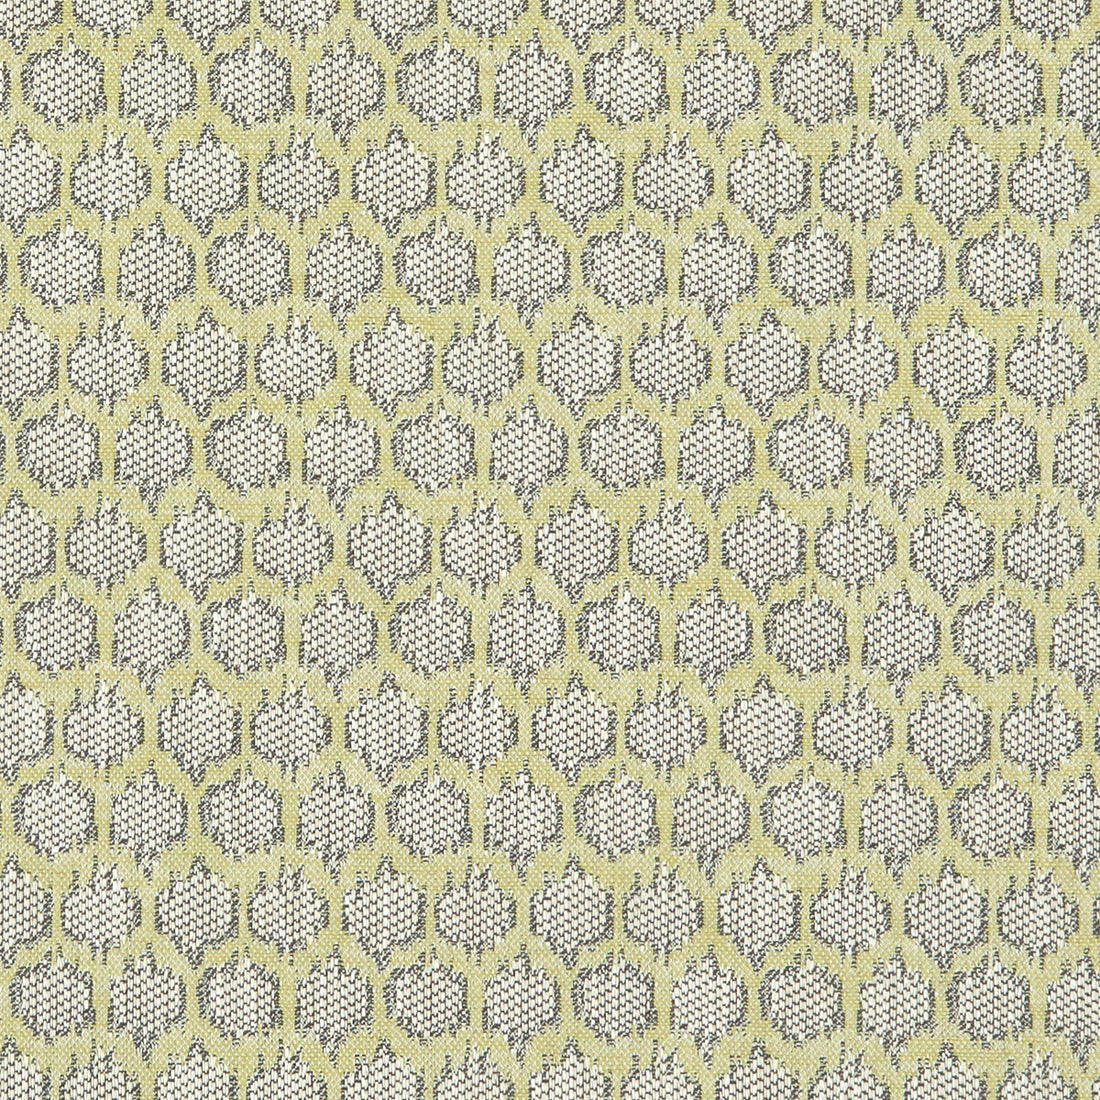 Dorset fabric in citron color - pattern F1178/03.CAC.0 - by Clarke And Clarke in the Clarke &amp; Clarke Heritage collection